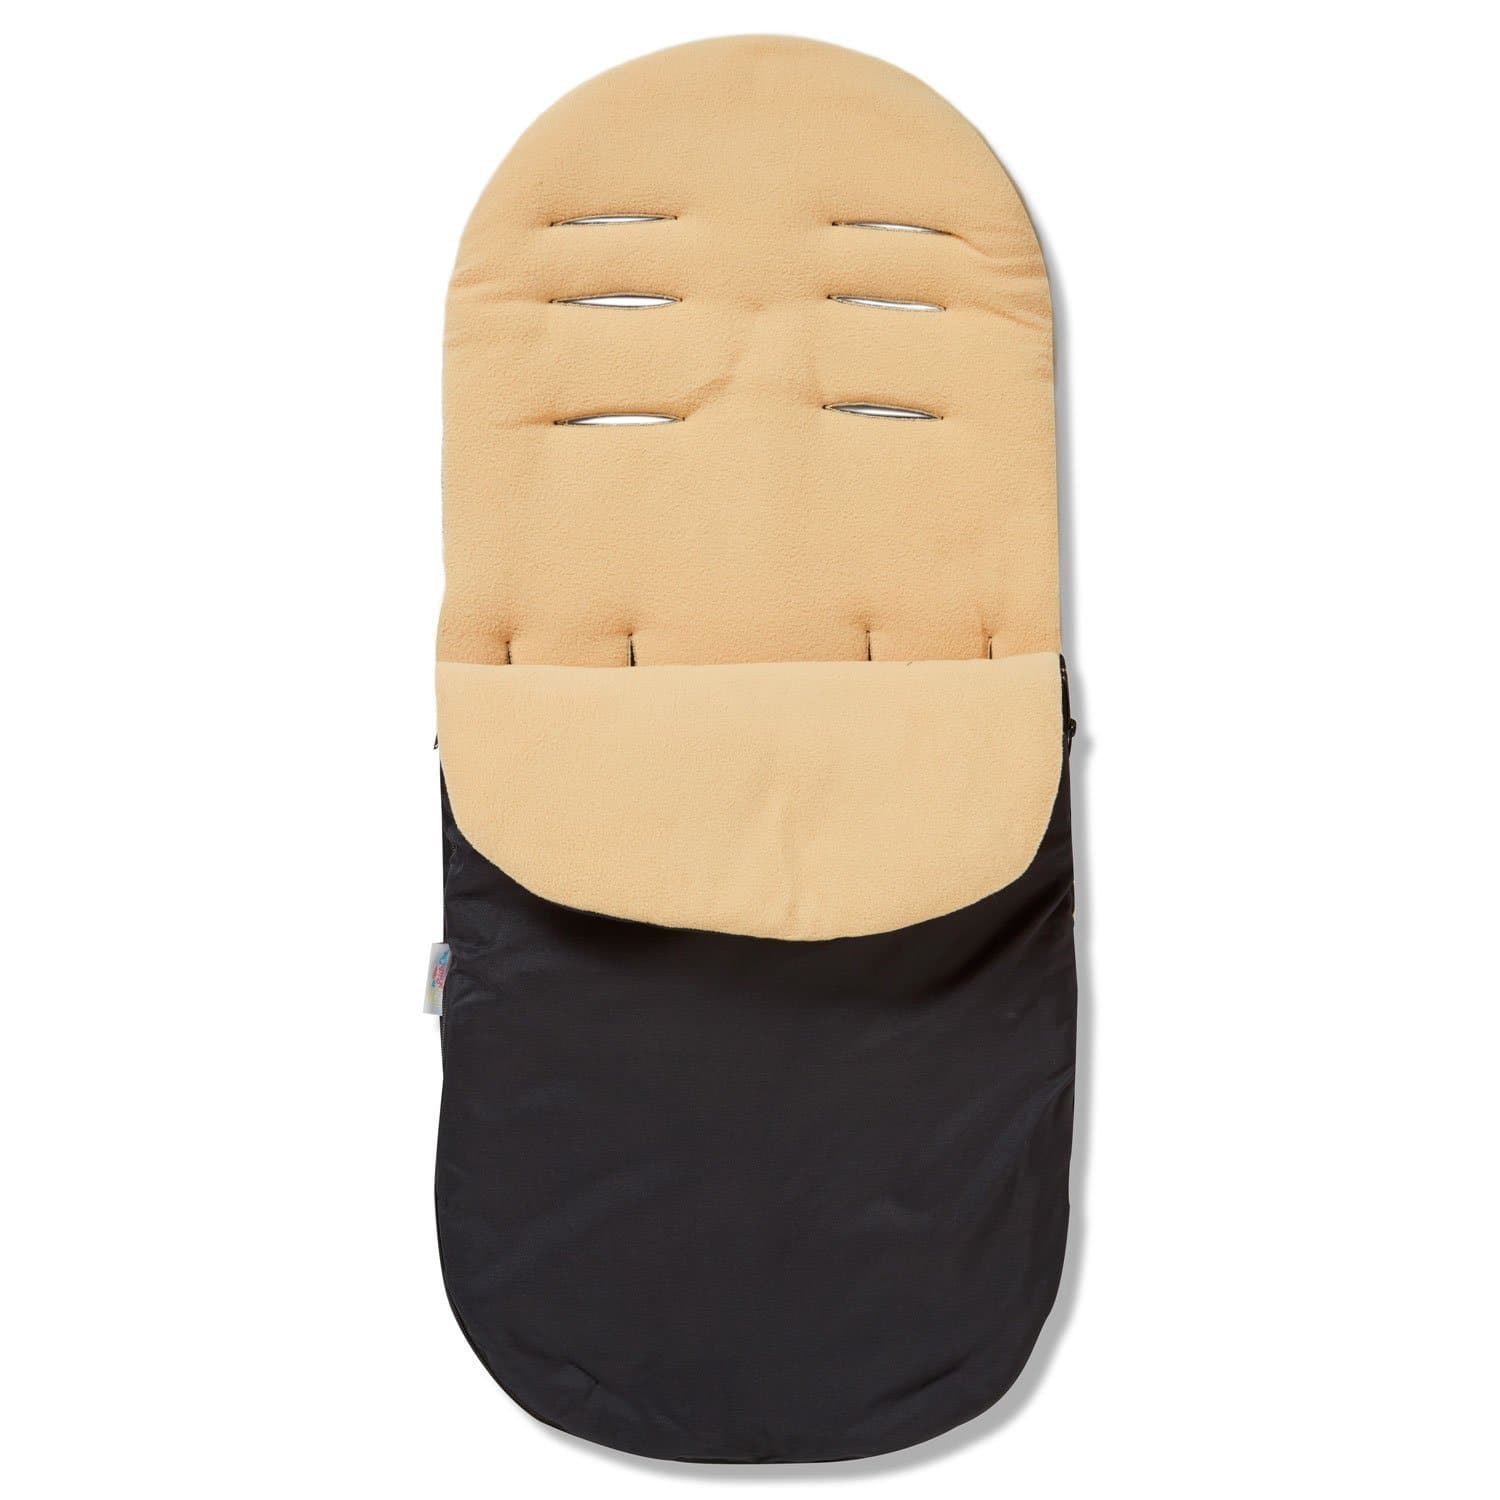 Footmuff / Cosy Toes Compatible with Baby Weavers - Sand / Fits All Models | For Your Little One